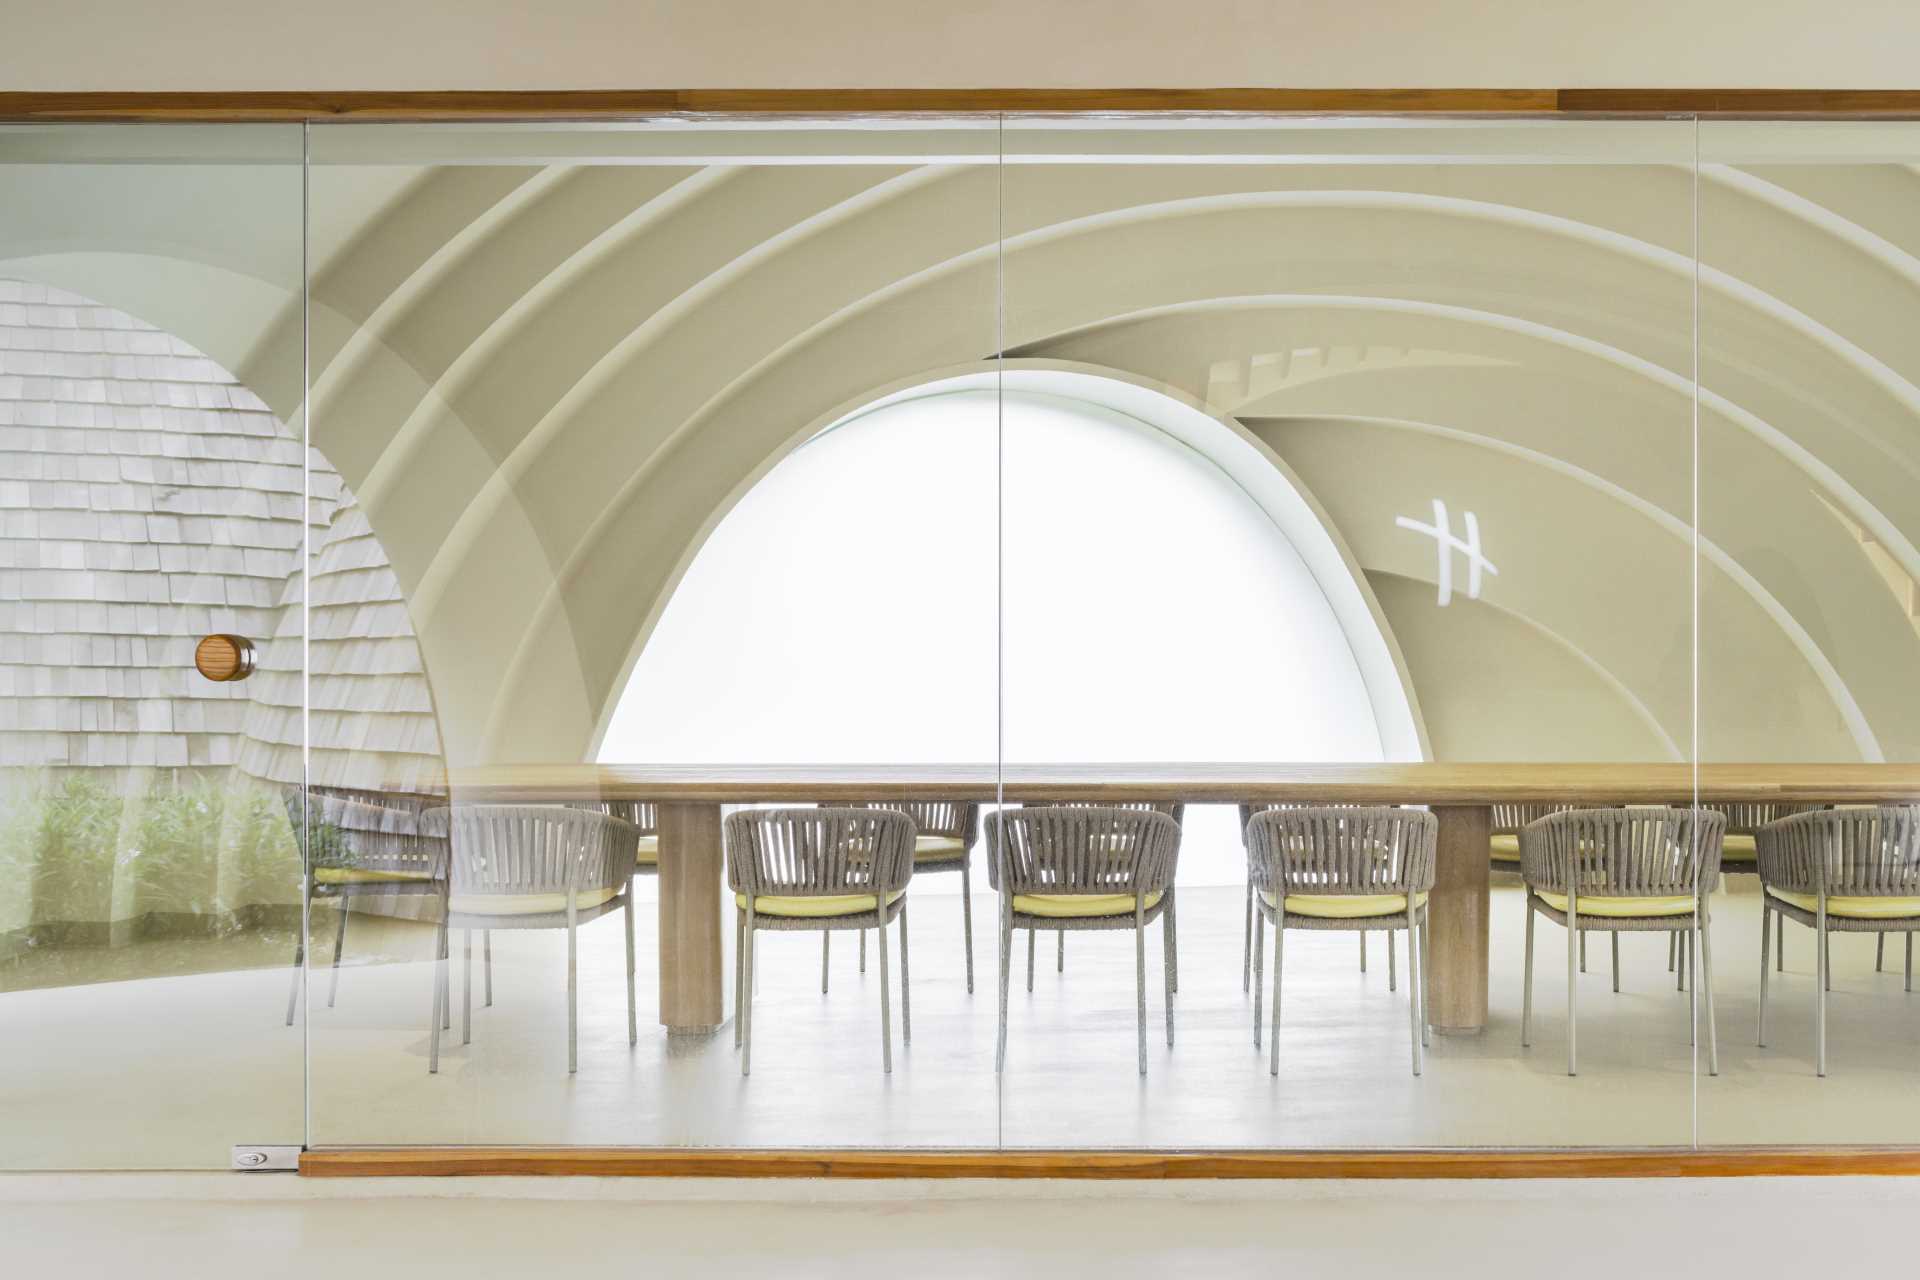 A glass-enclosed conference room that enjoys views of the curved interior.